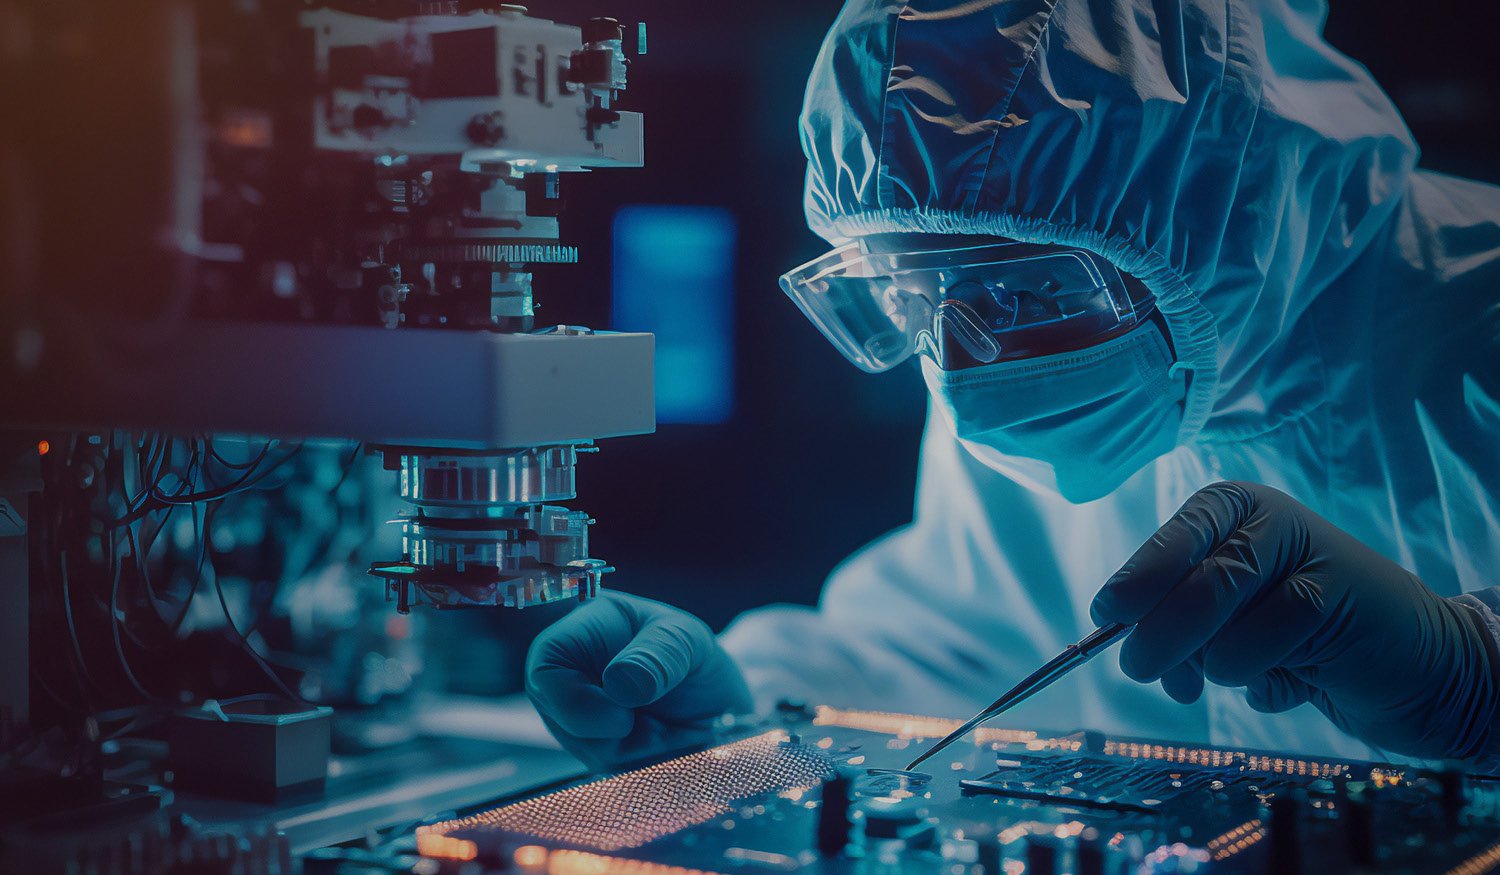 Guiding the Path Forward for U.S. Semiconductor Manufacturing | How Veryable Can Offer Support